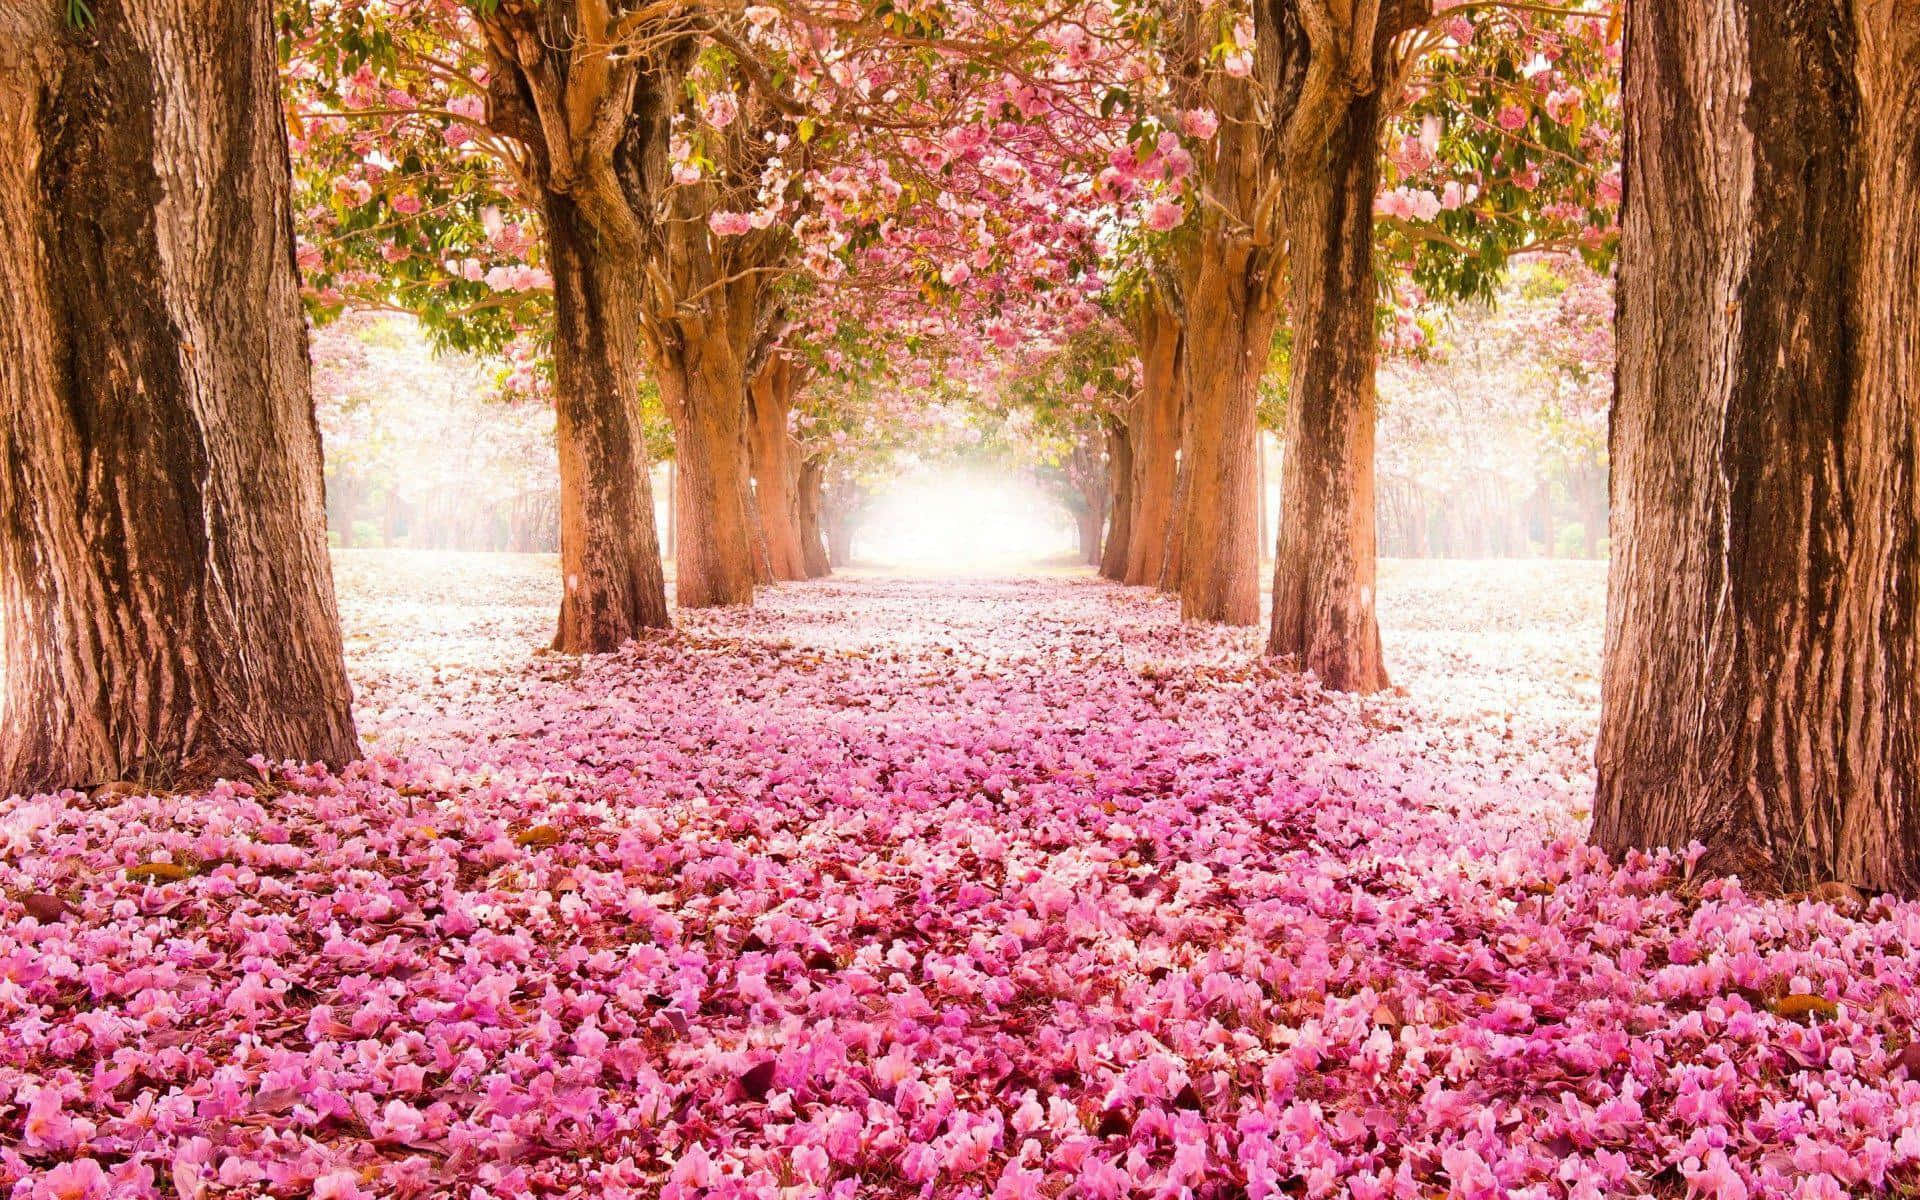 A Pink Pathway Lined With Trees And Flowers